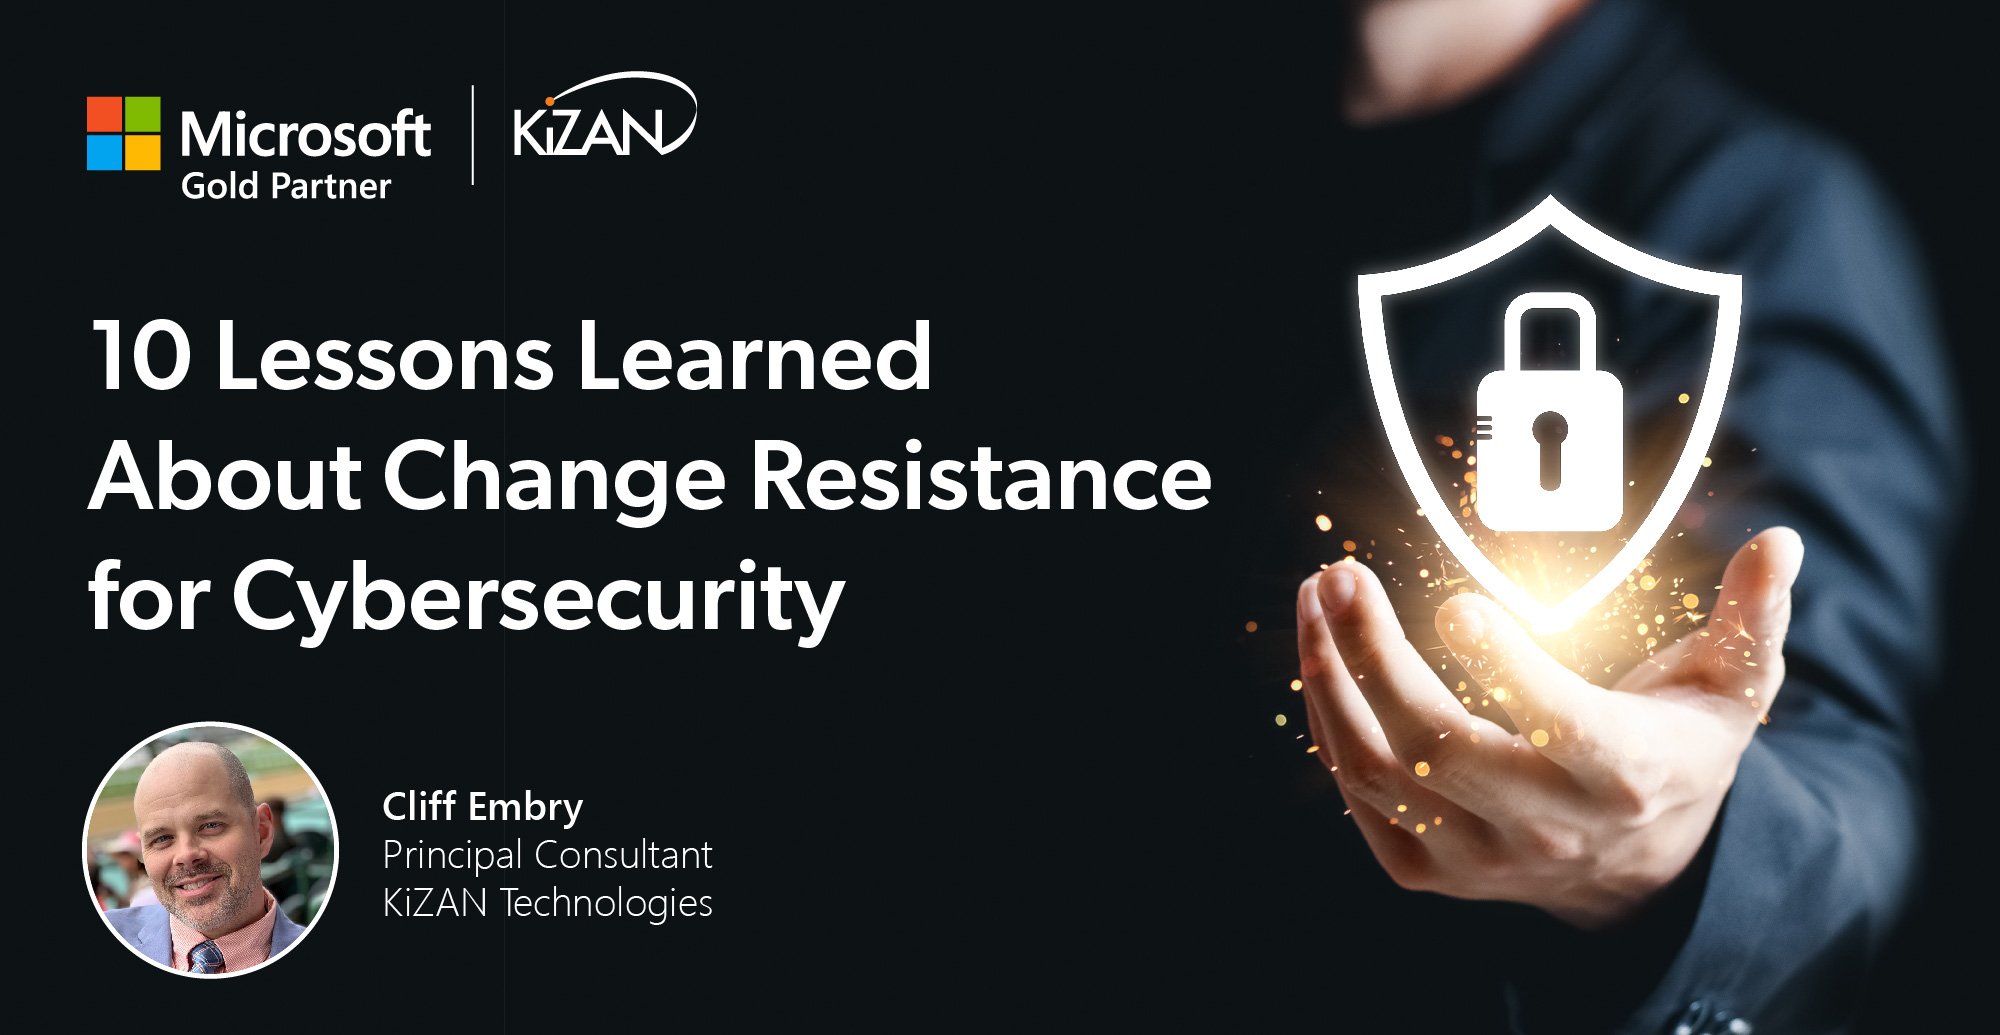 10 Lessons Learned About Change Resistance for Cybersecurity